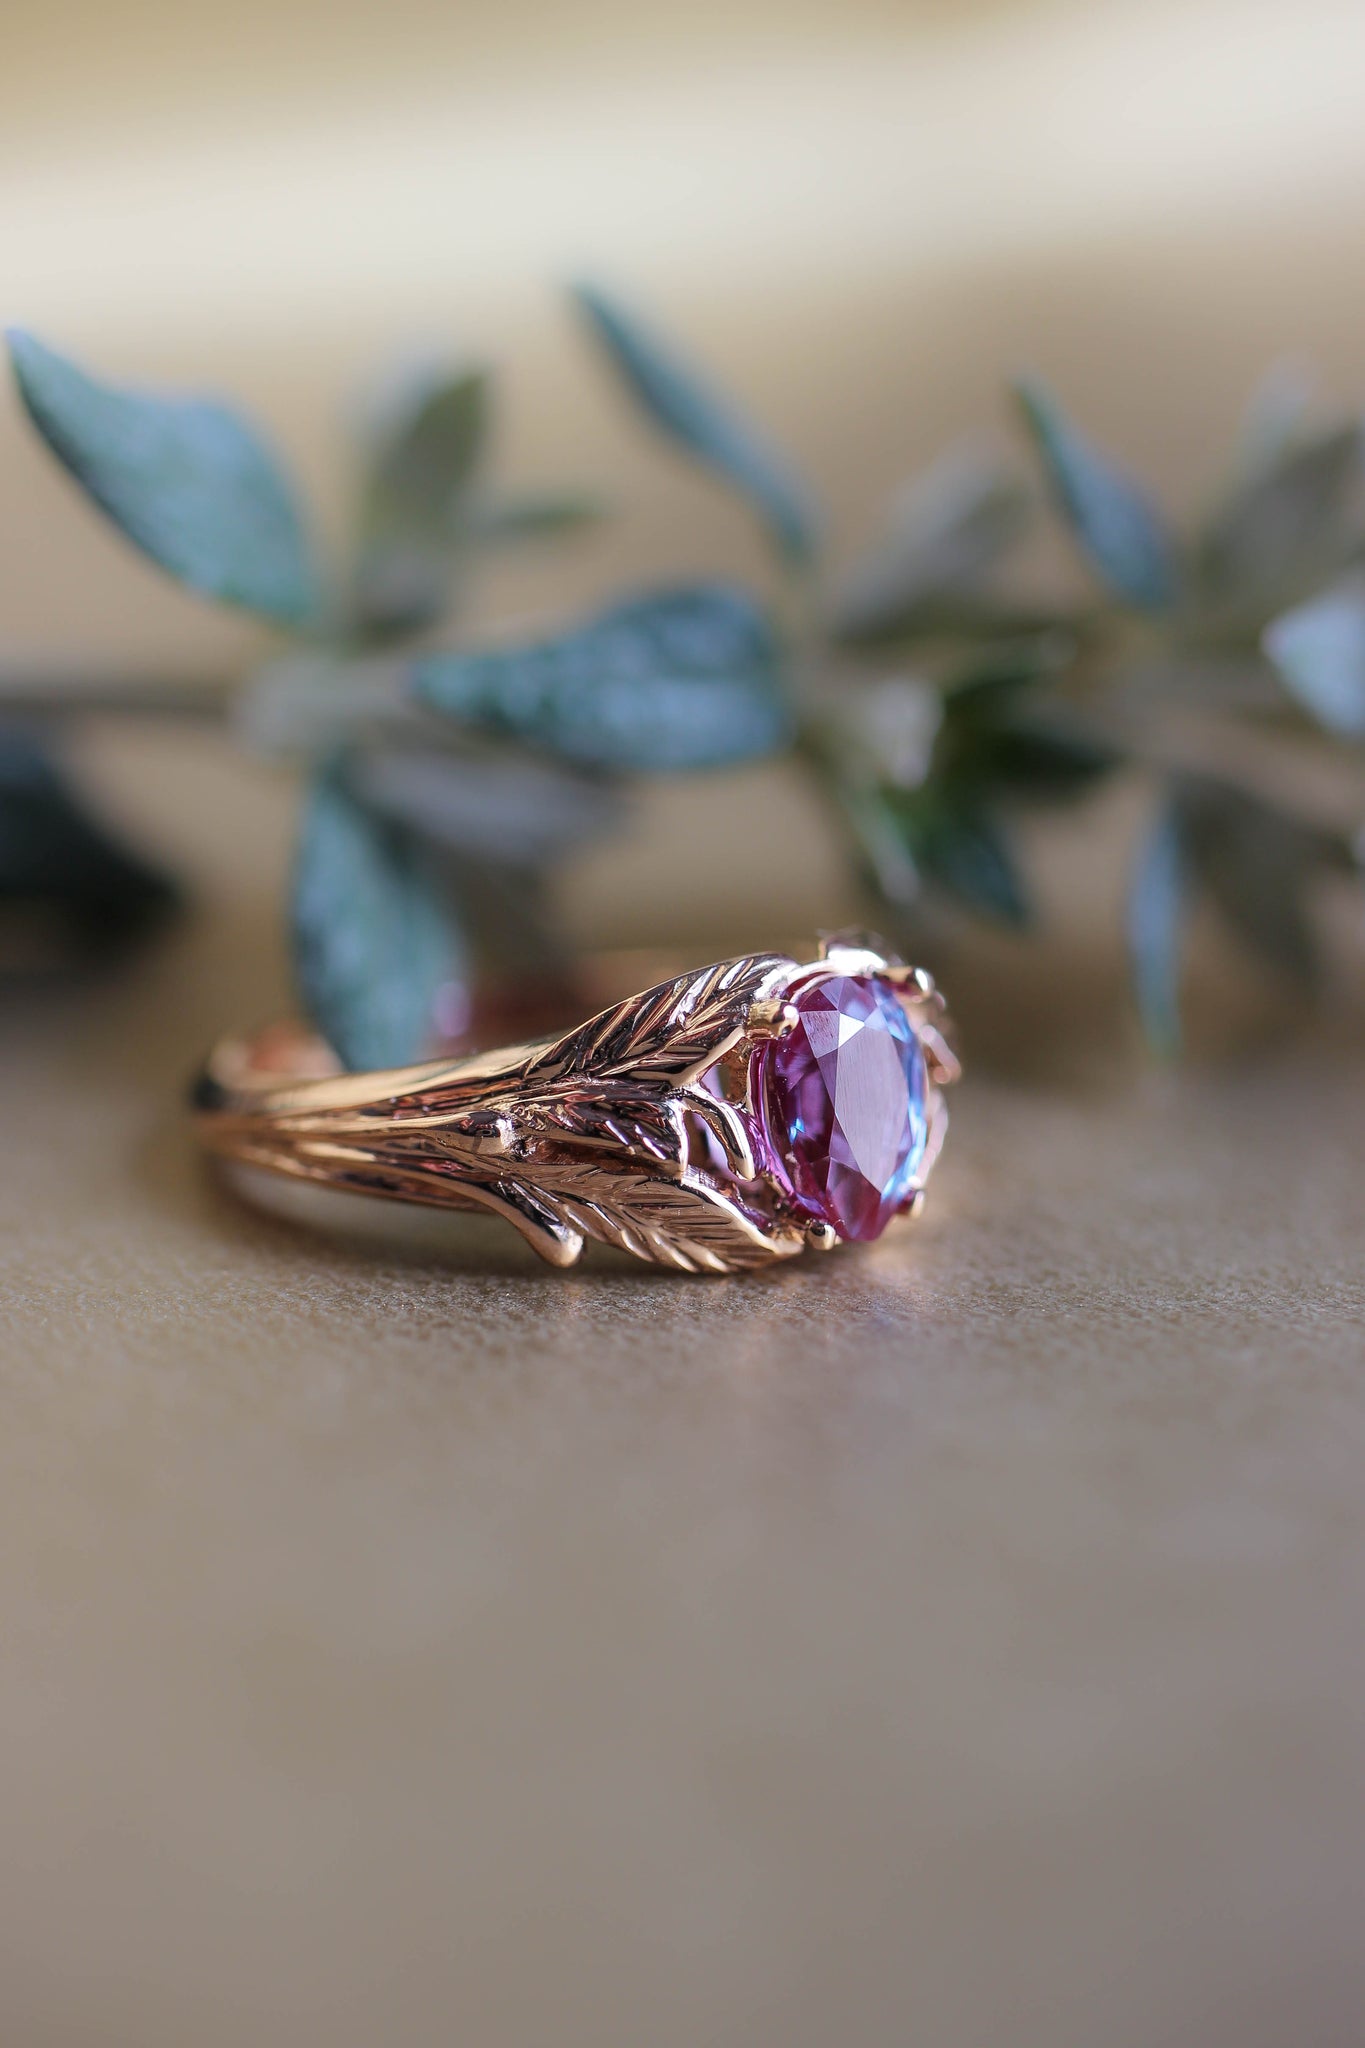 READY TO SHIP: Wisteria in 14K rose gold, pear alexandrite 7x5 mm, RING SIZE - 8.25 US - Eden Garden Jewelry™